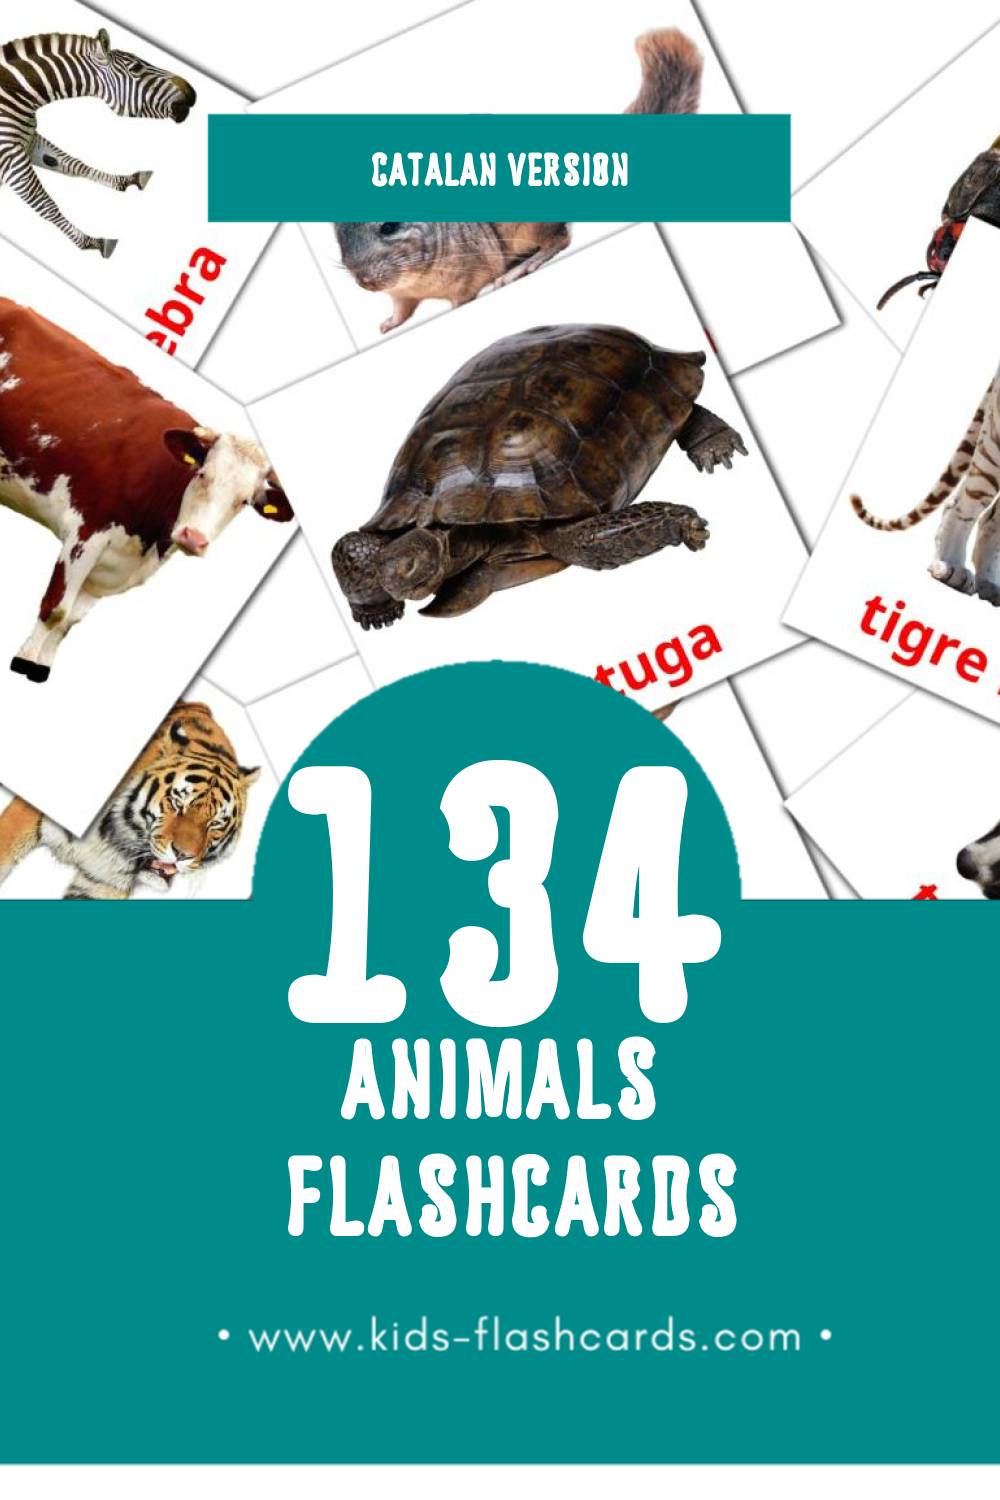 Visual Animals Flashcards for Toddlers (134 cards in Catalan)